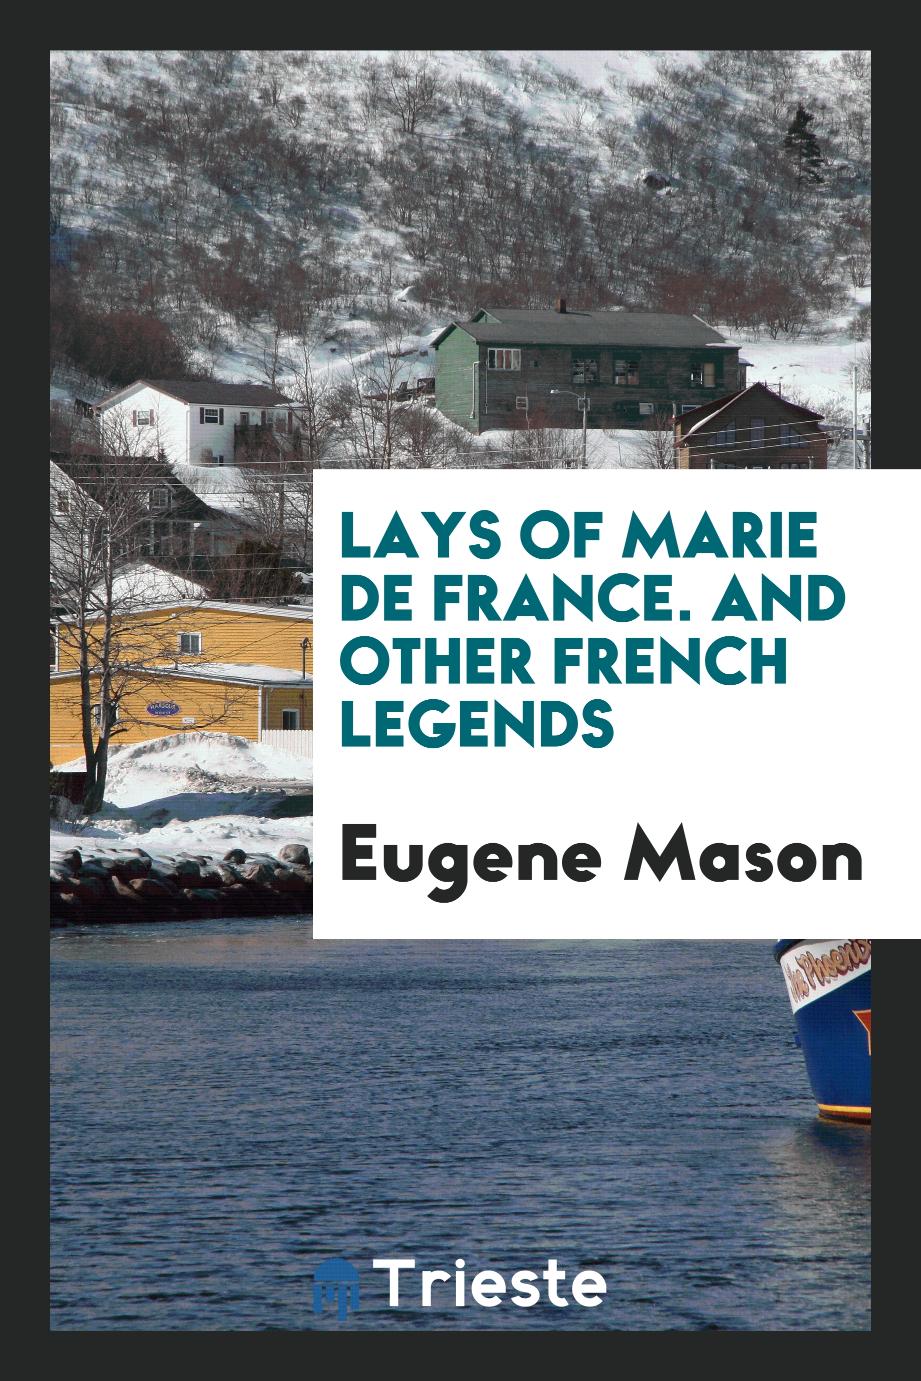 Lays of Marie de France. And other French legends